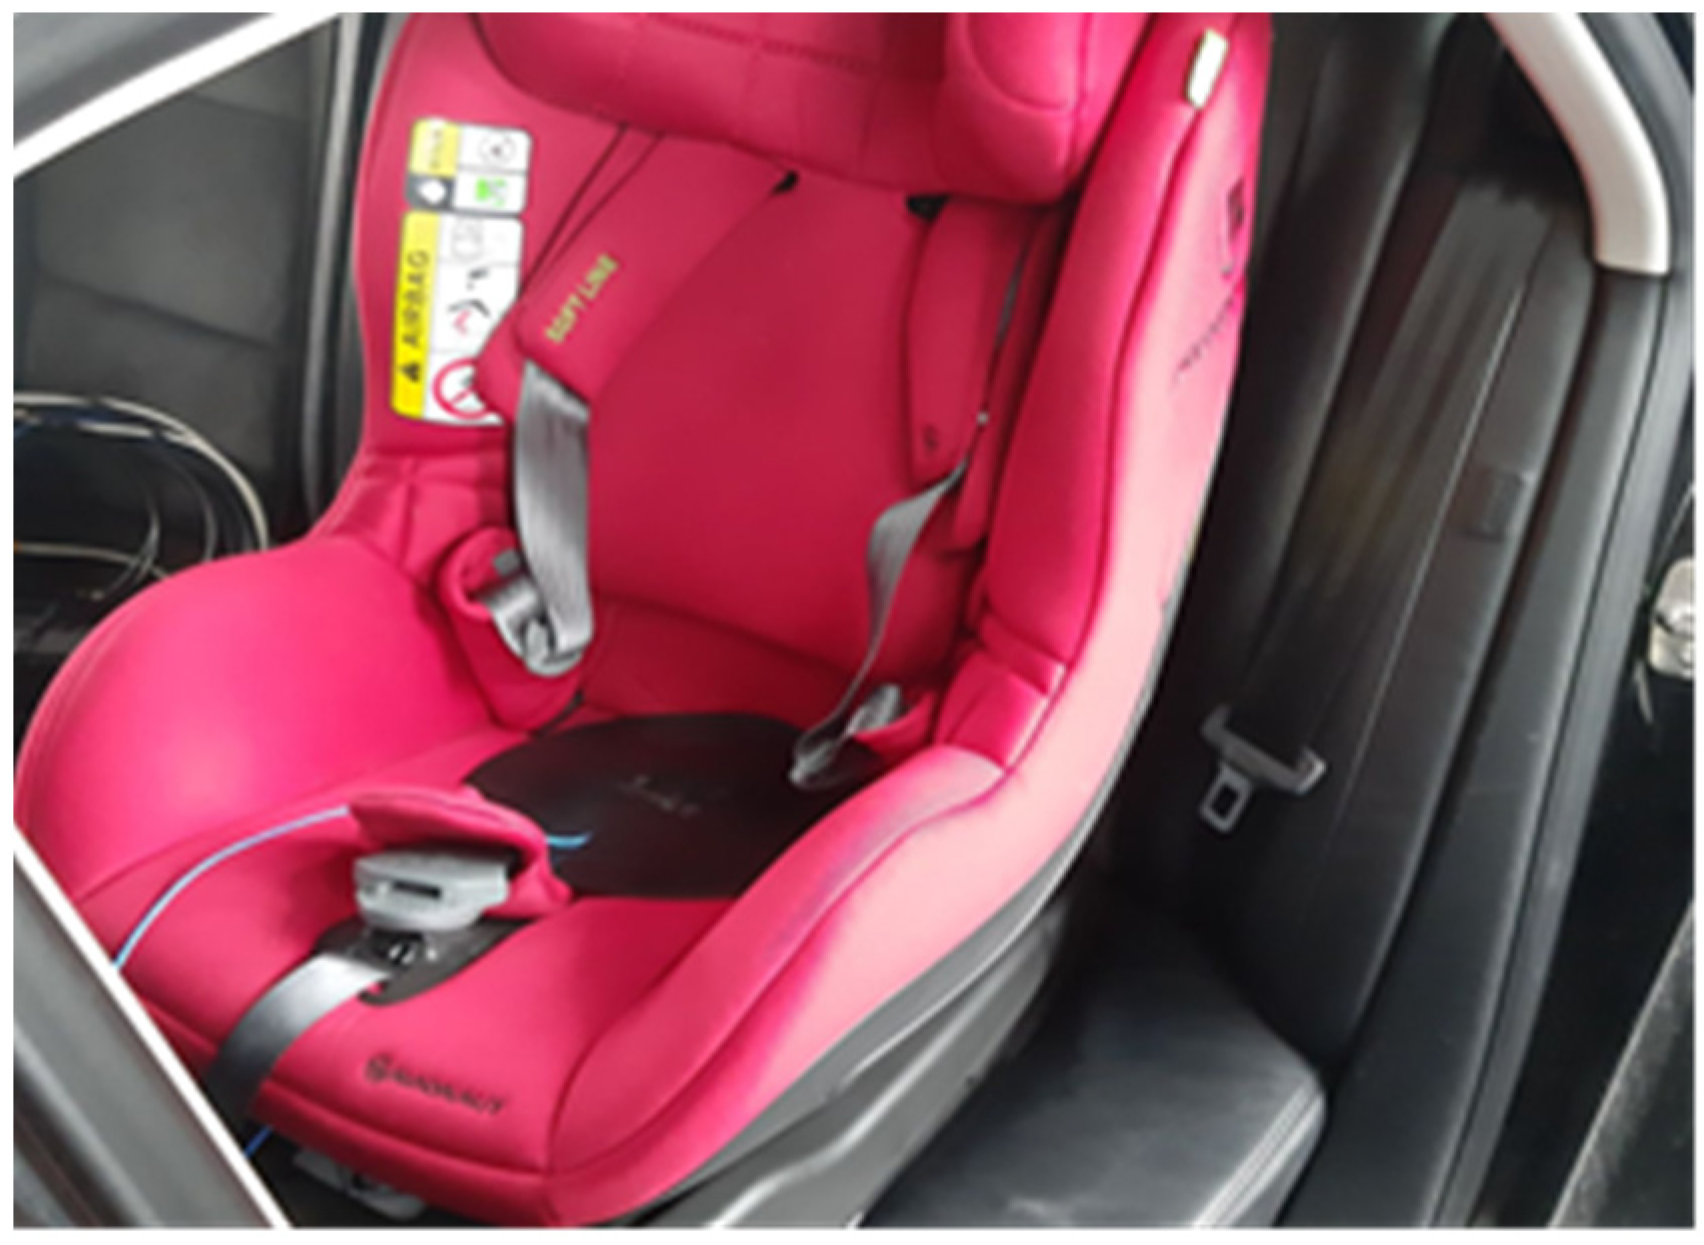 Sensors | Free Full-Text | Research and Analysis of the Propagation of  Vertical Vibrations in the Arrangement of a Vehicle Seat&mdash;A  Child&rsquo;s Seat